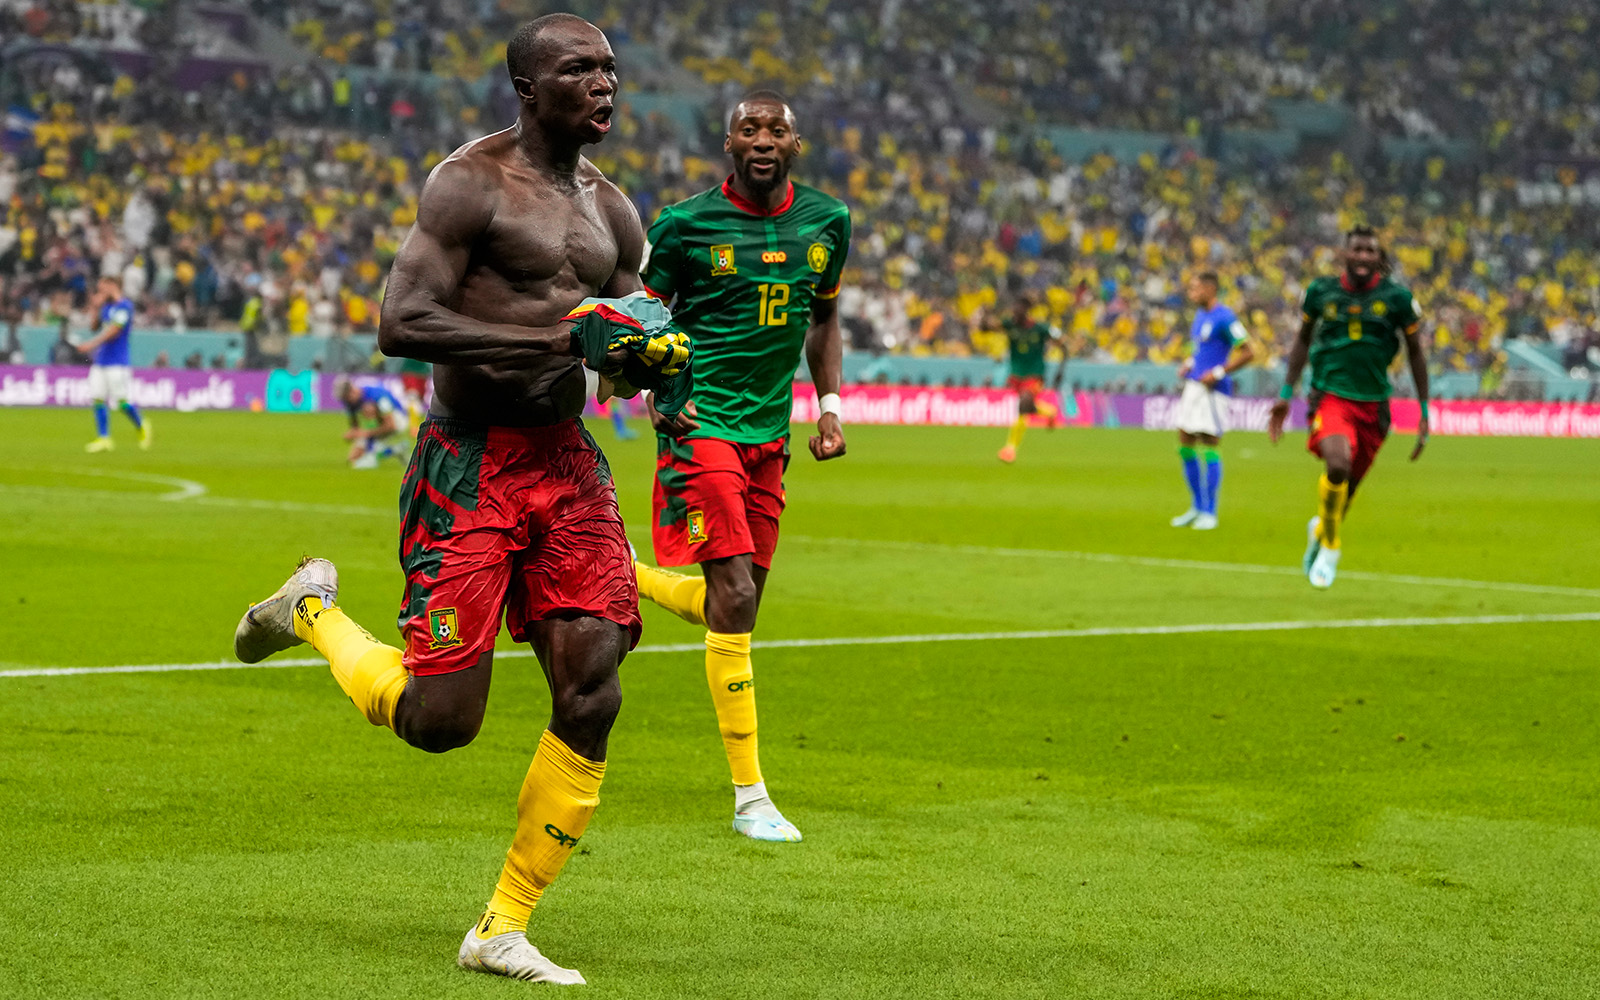 Brazil wins World Cup group despite historic 1-0 loss to Cameroon